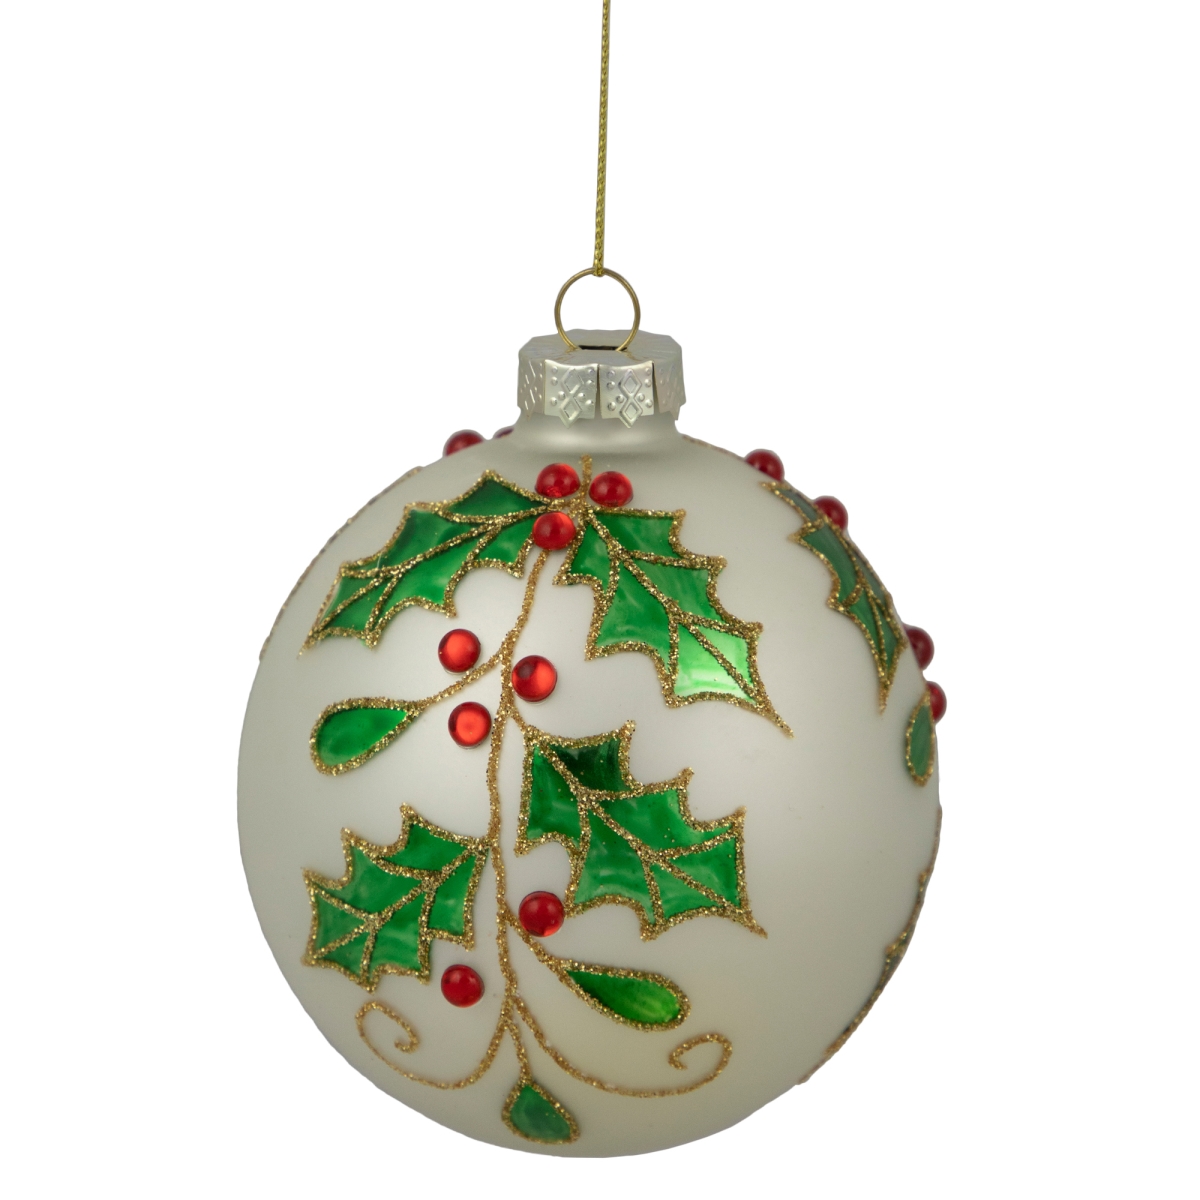 Picture of Northlight 35254043 4.5 in. Glass Christmas Ball Ornament with Holly Leaves, White